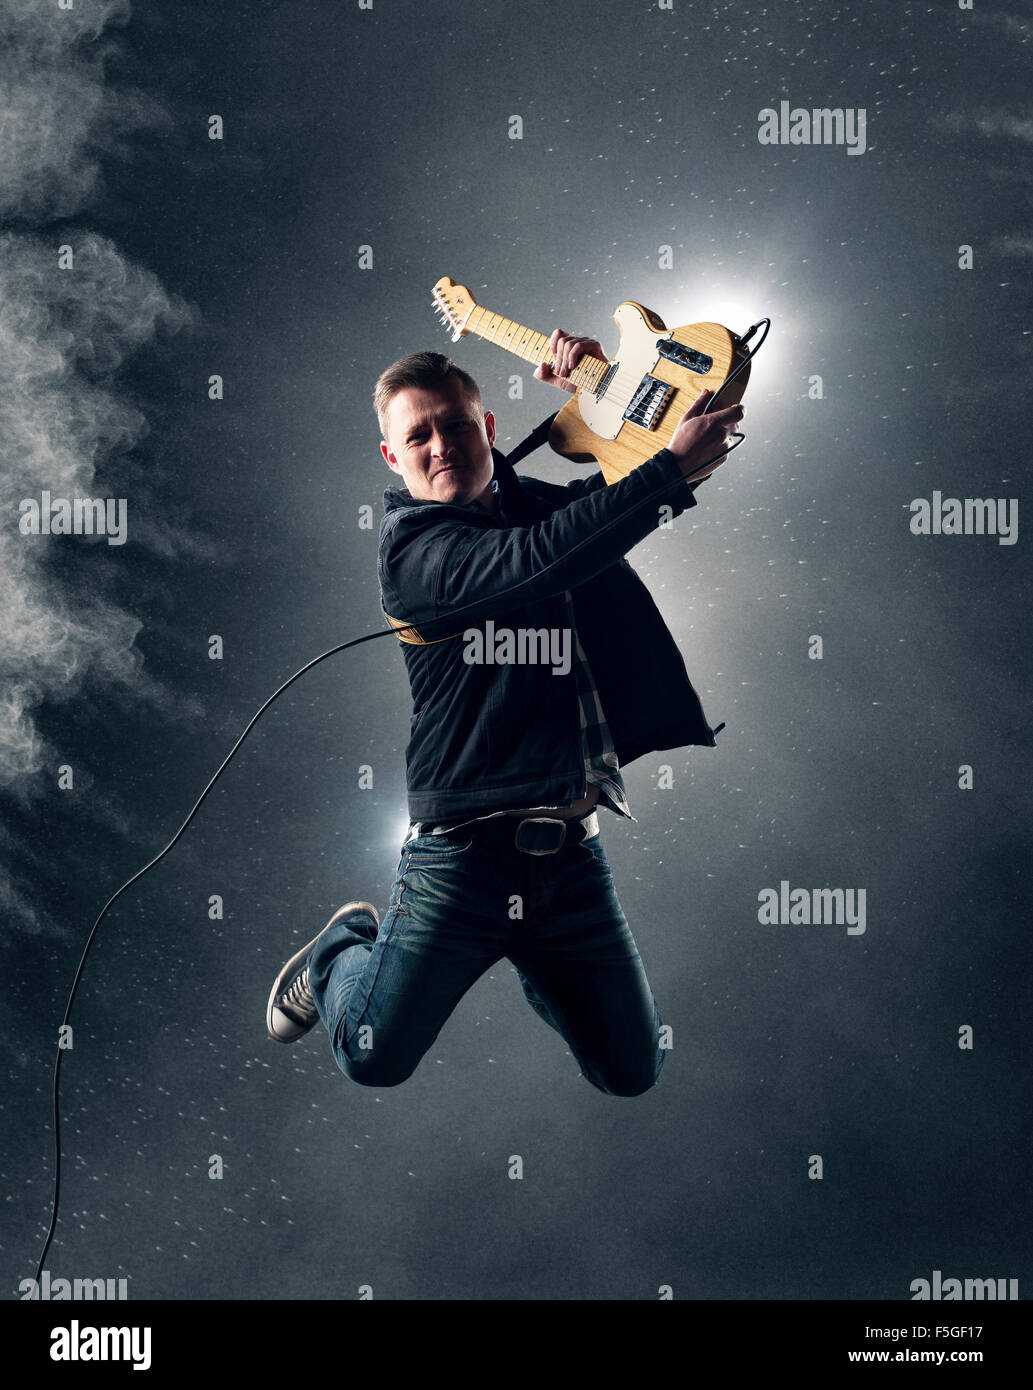 Rock and Roll Guitarist jumping with electric guitar with smoke and powder in background Stock Photo